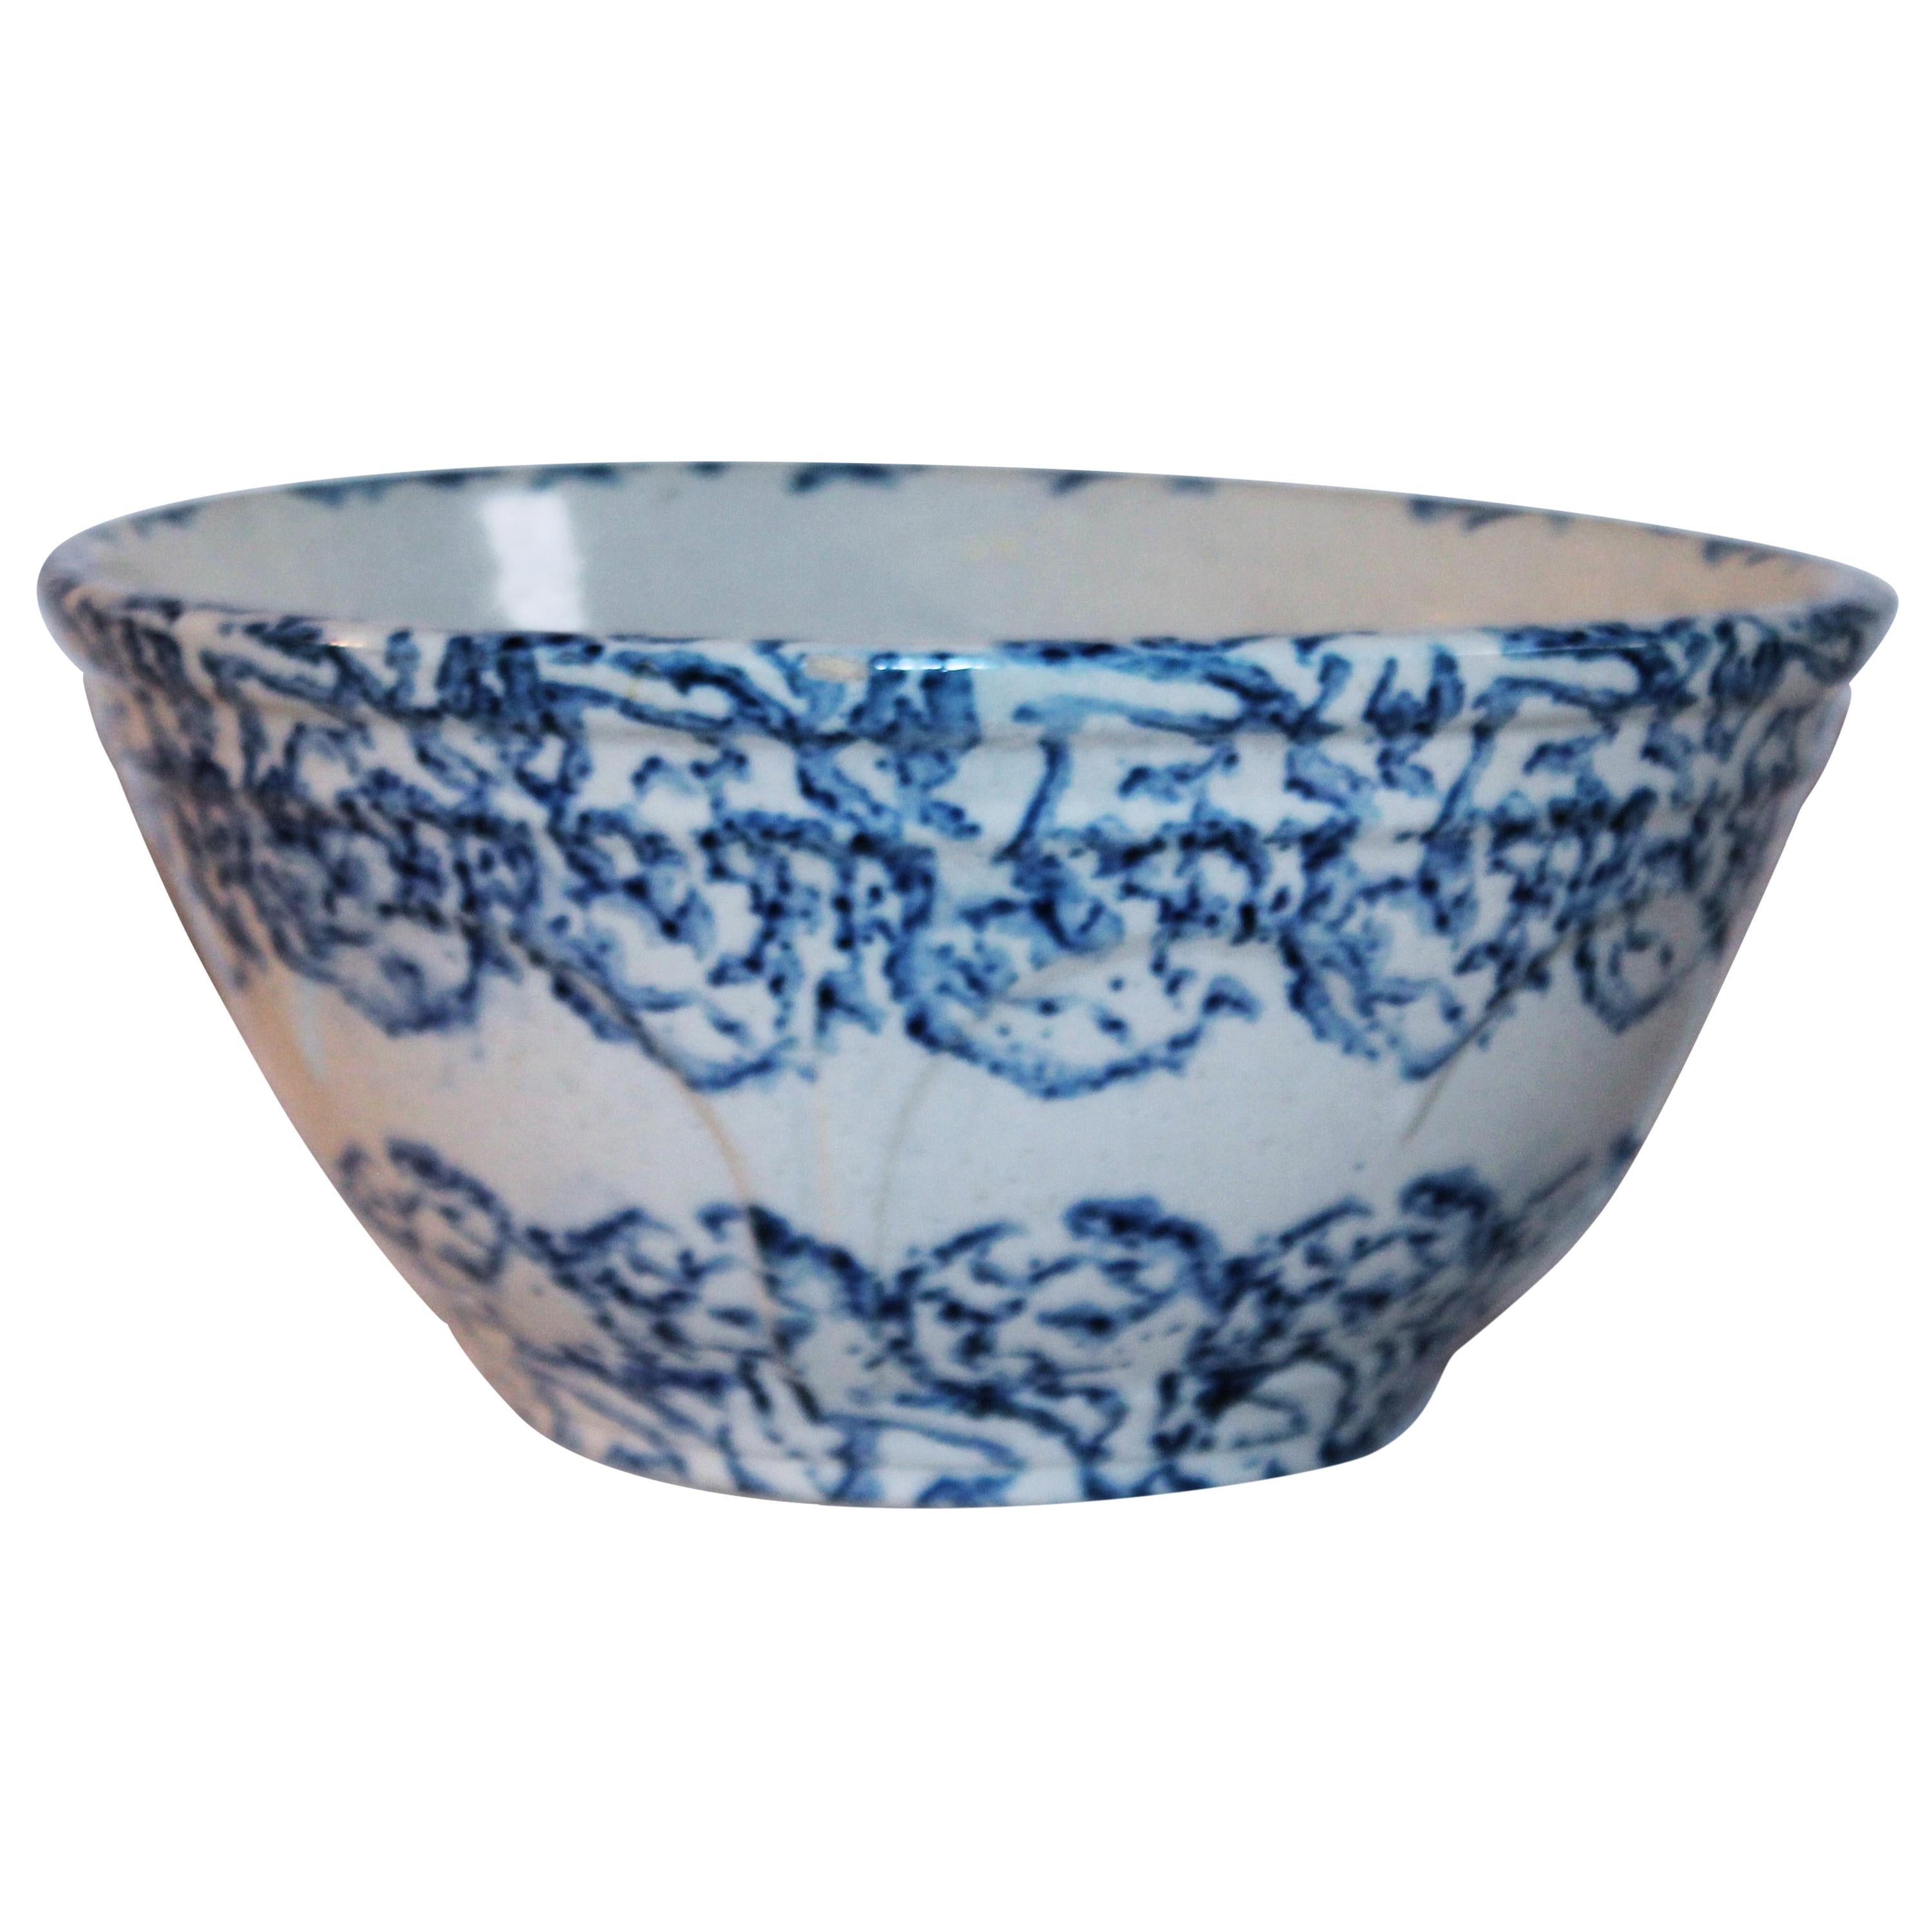 19th Century Sponge Ware Pottery Mixing Bowl For Sale